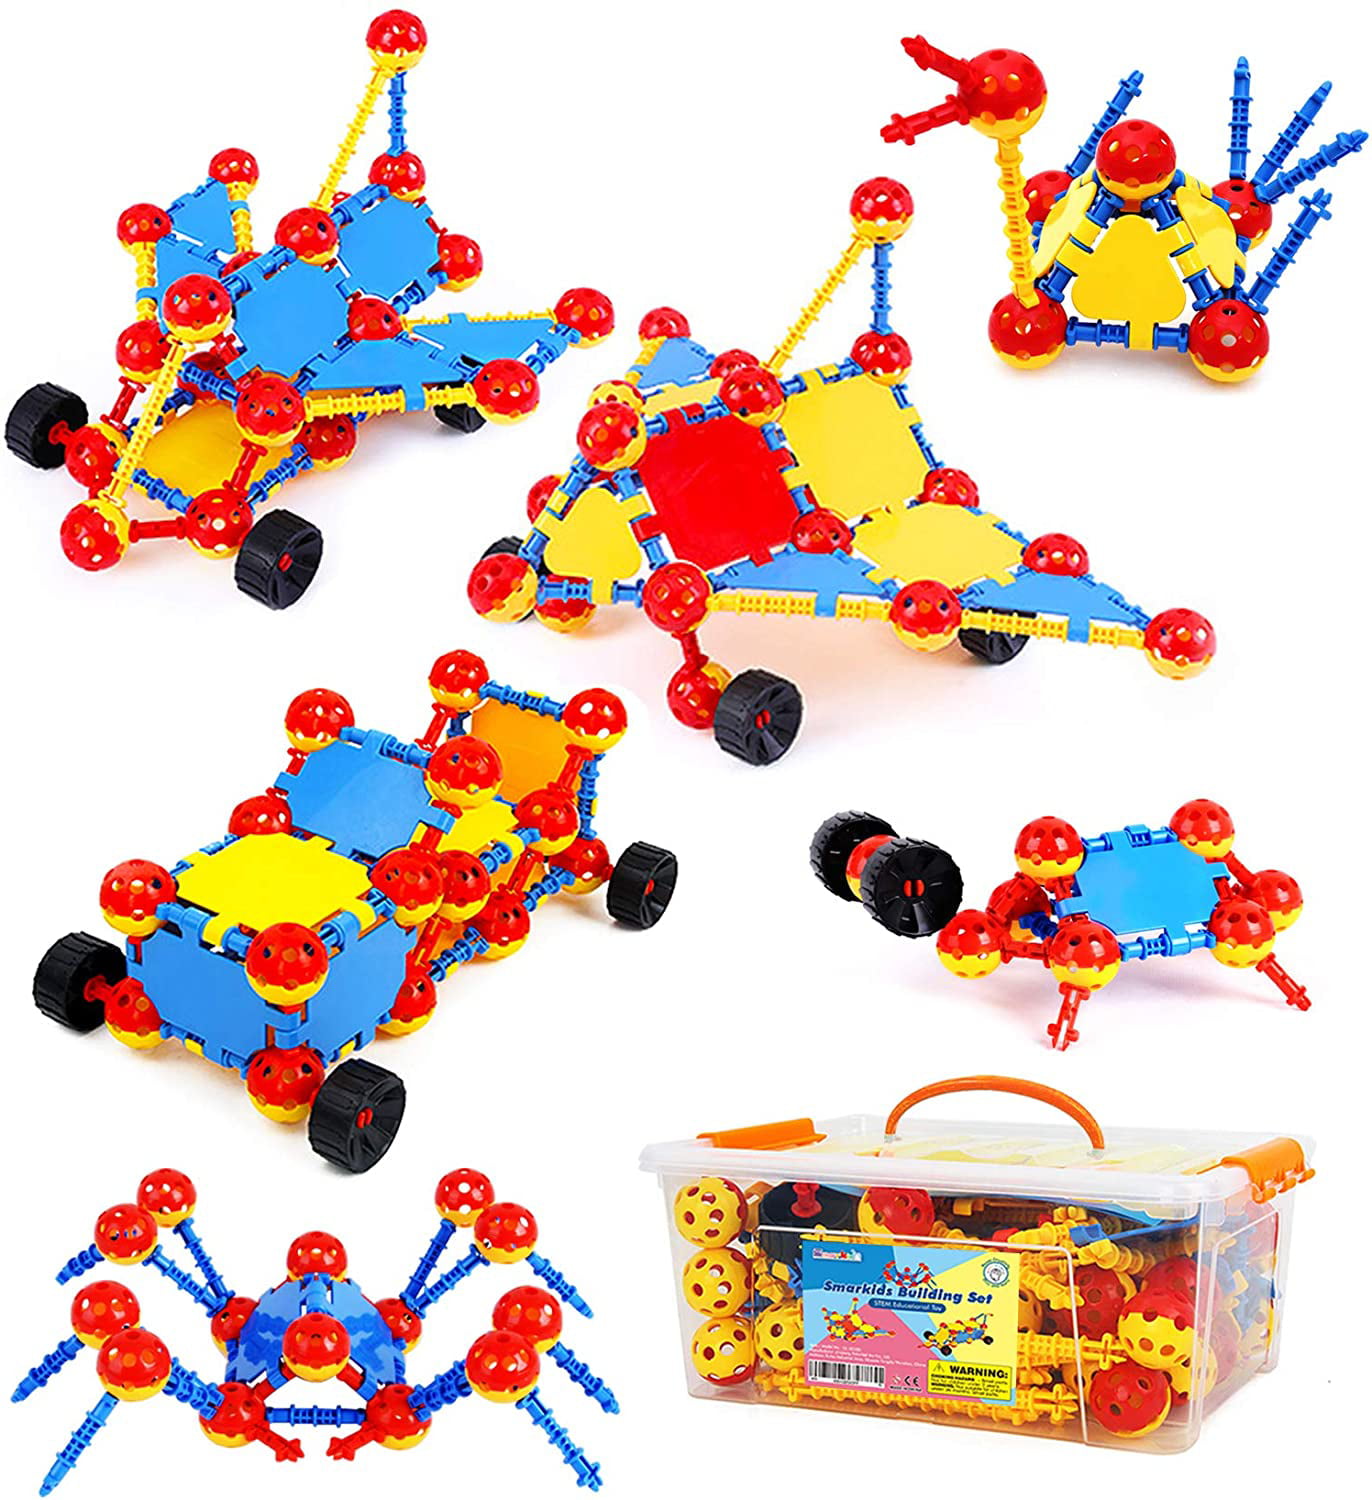 70 PCS Educational Activities Building Blocks for Kids STEM Toys for Boys and Girls Interlocking Playset for Age 3 